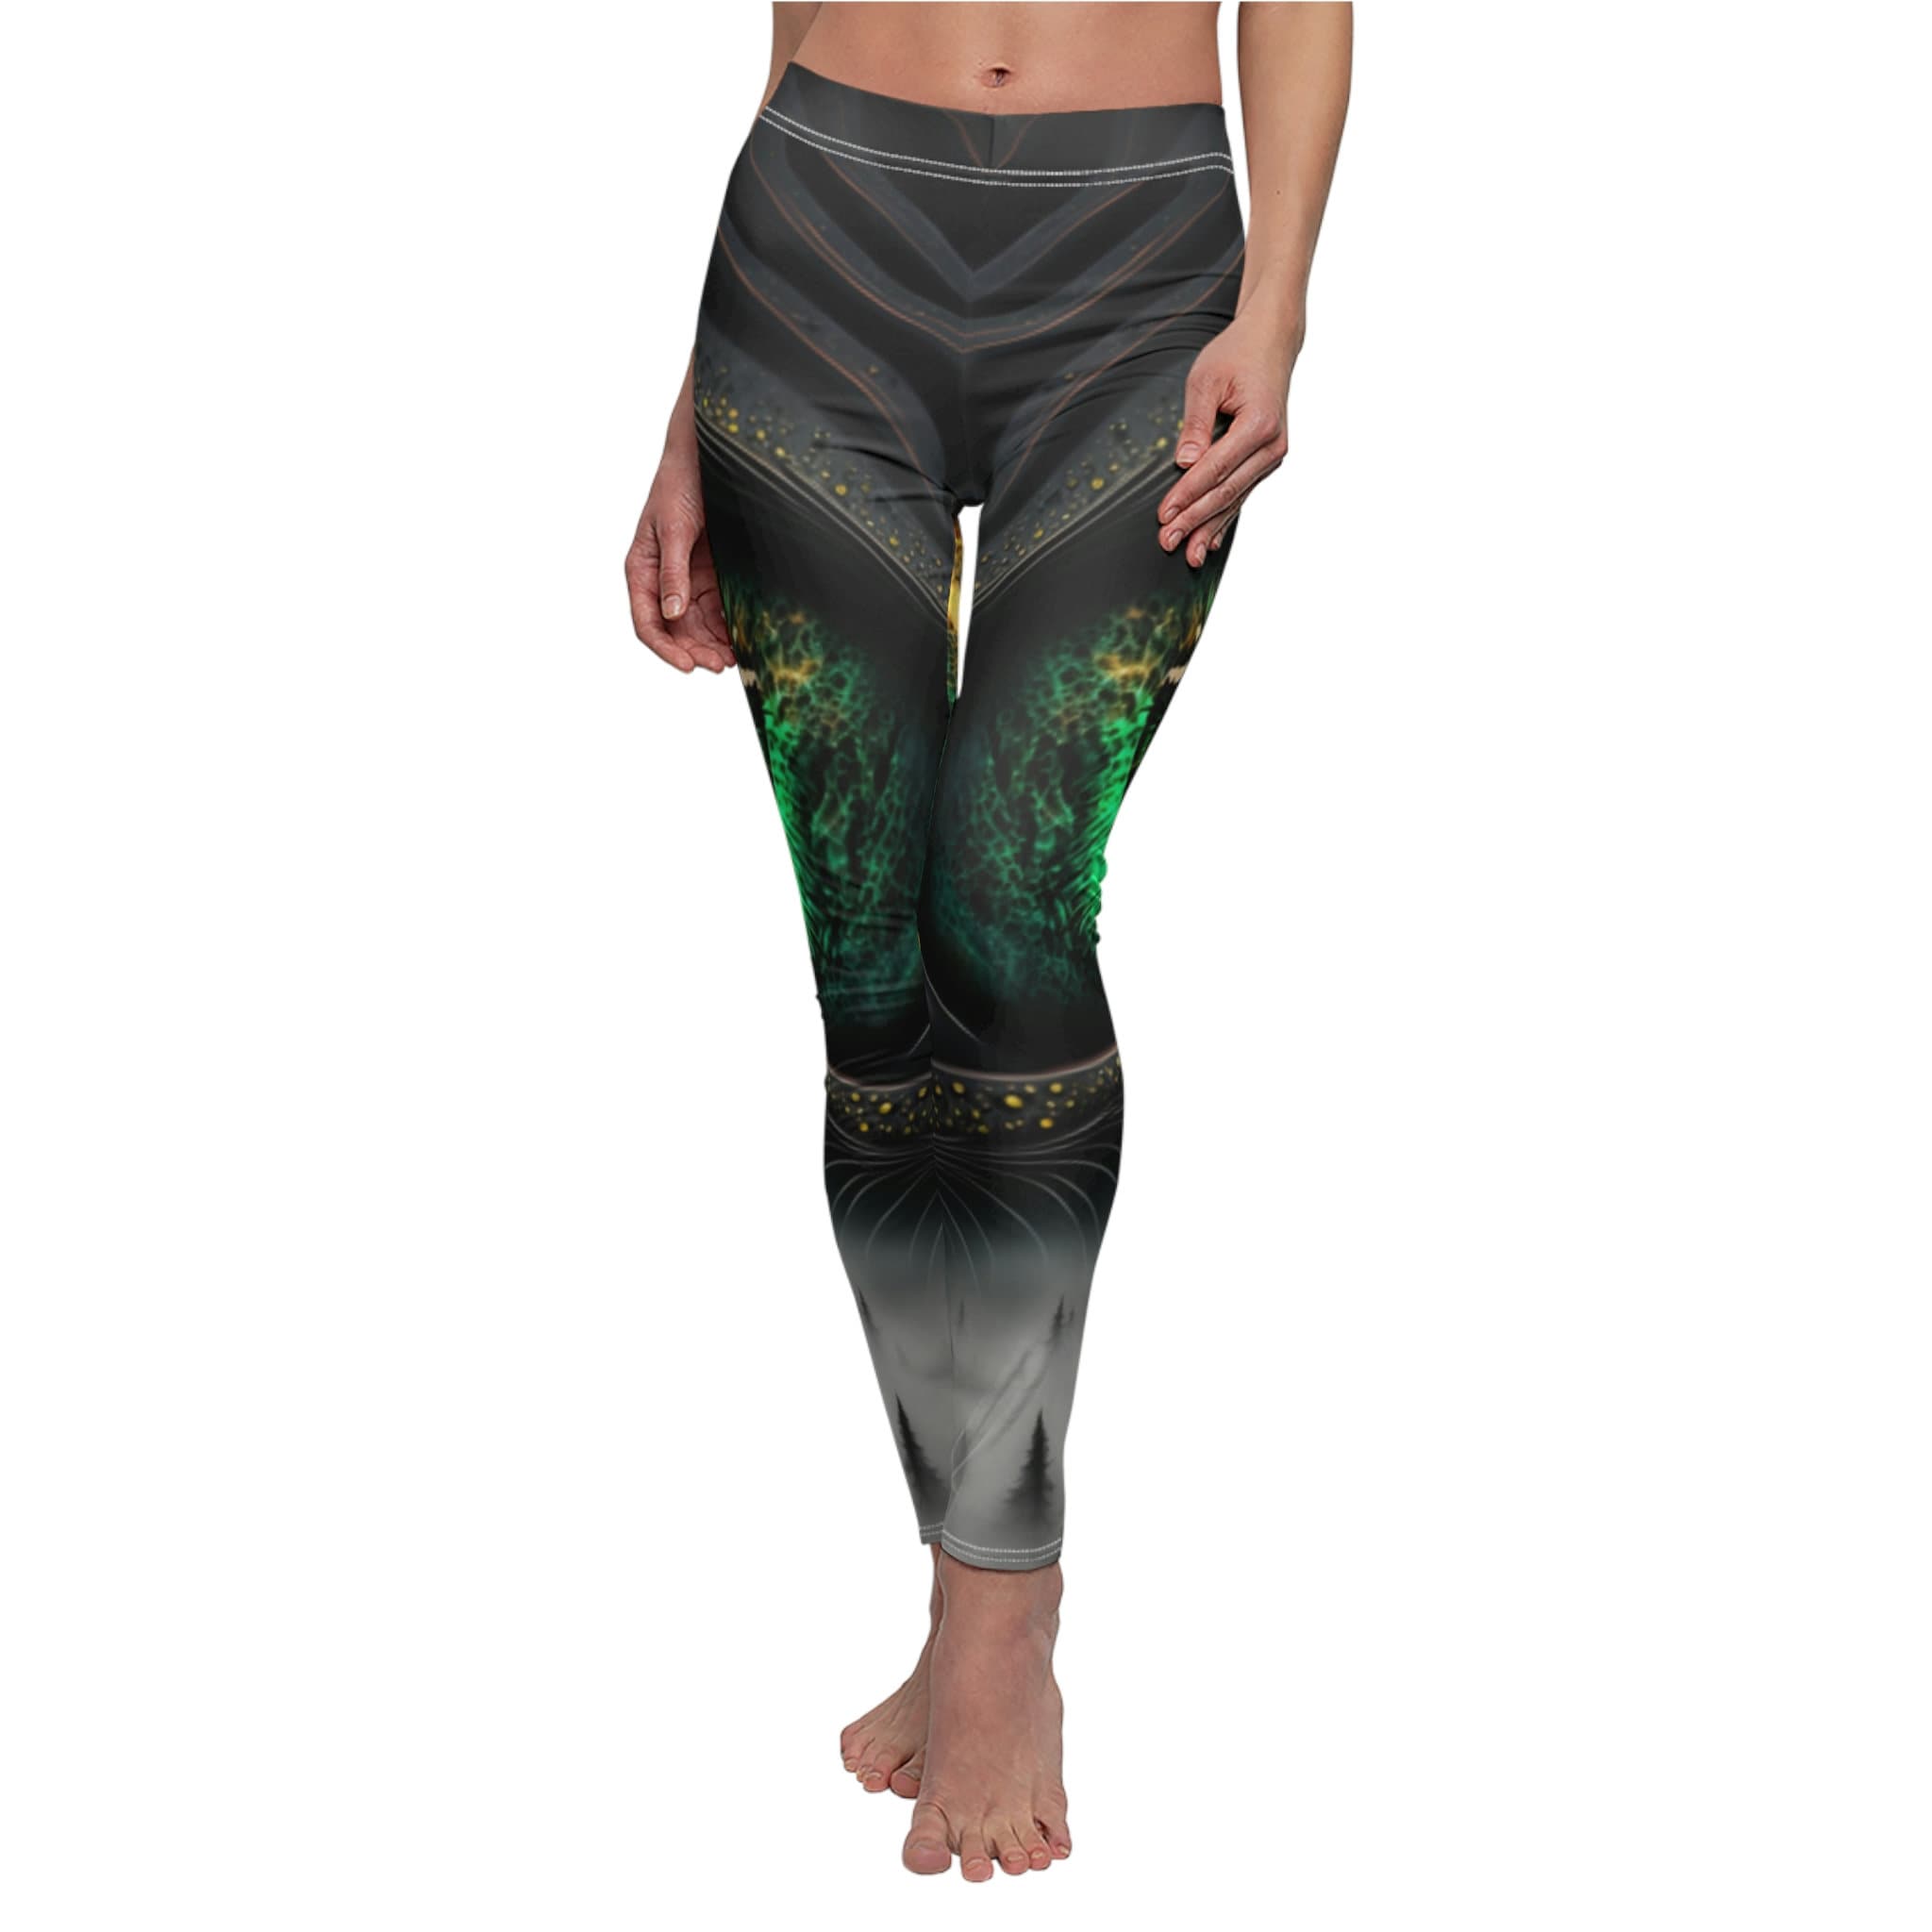 Circuit Board Capri Leggings for Women Navy Blue Capris W/ Cosplay Robot  Print, Squat Proof, Non See Through Workout Pants Running Tights 